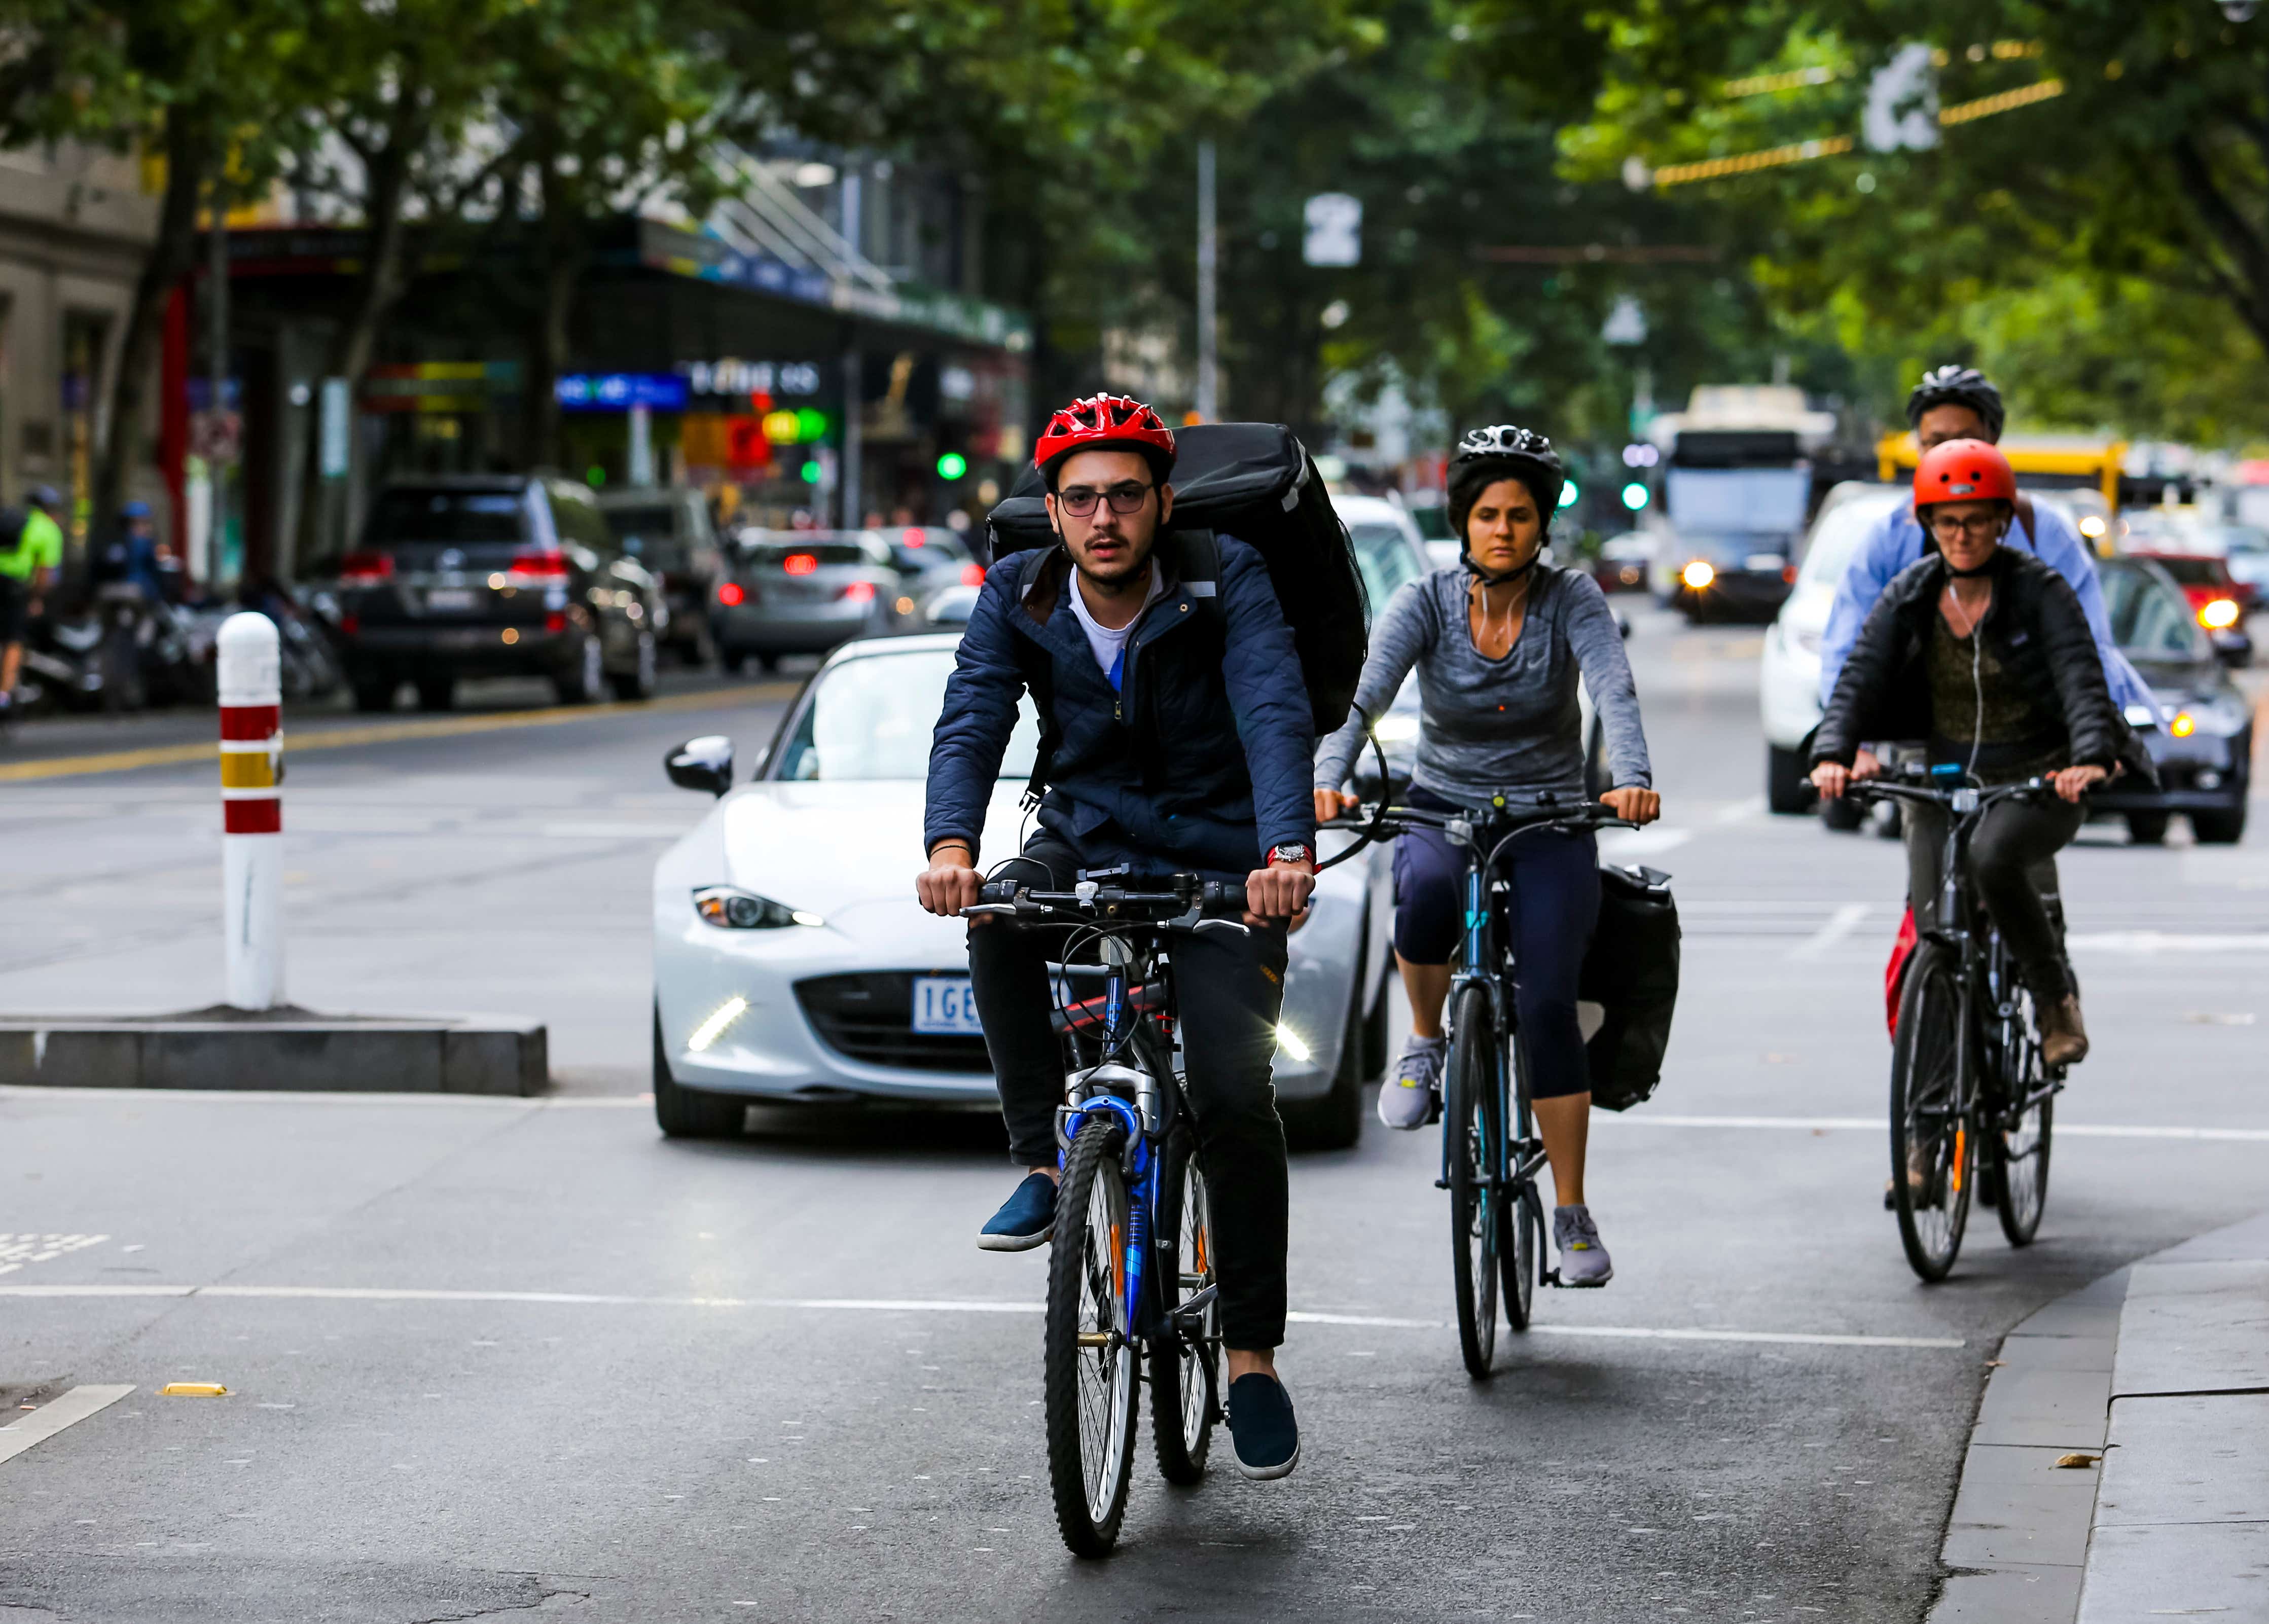 Cyclists in a group, blocking cars